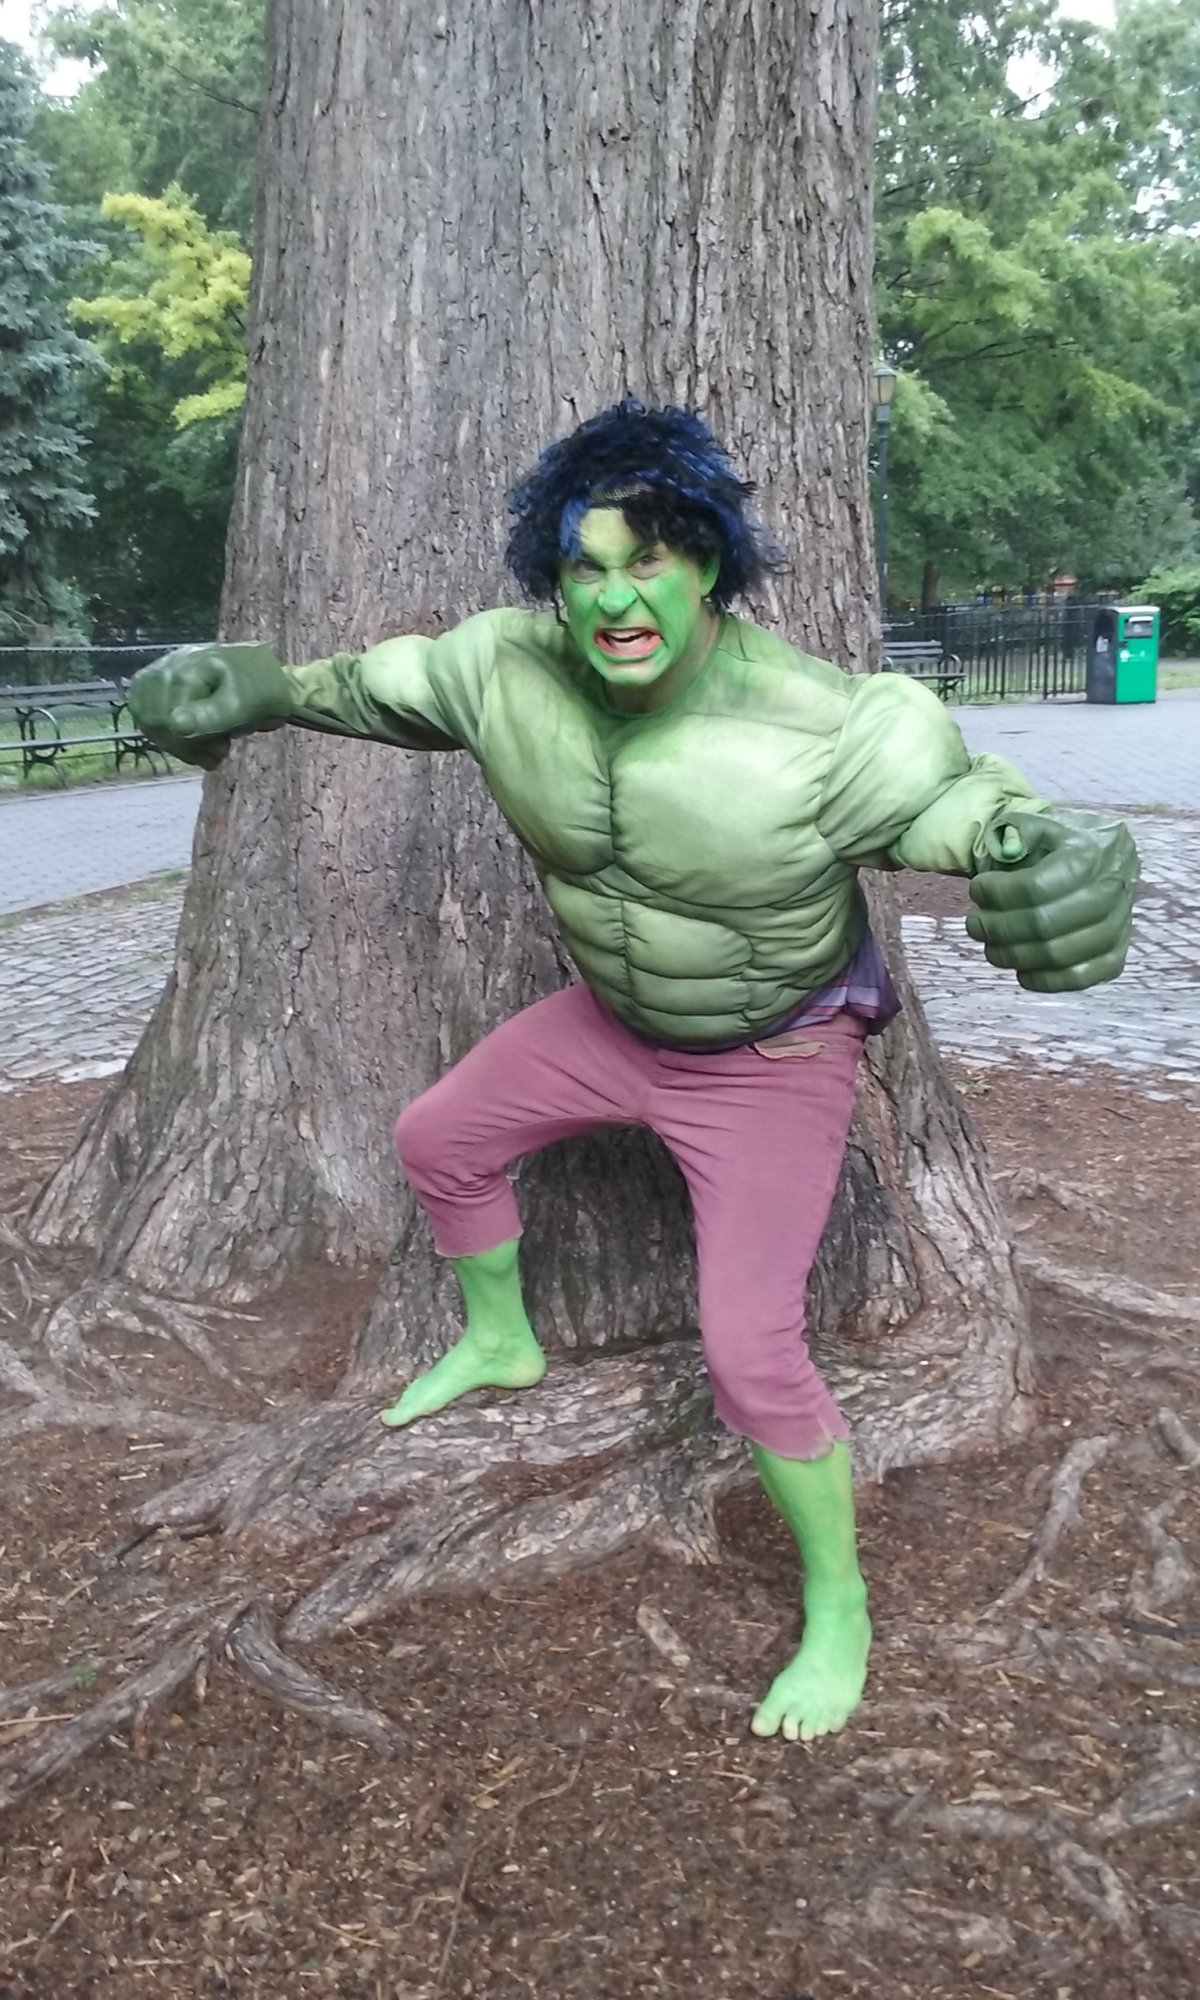 The Incredible Hulk in Tompkins Square Park for some reason. Photos by Gerard Flynn